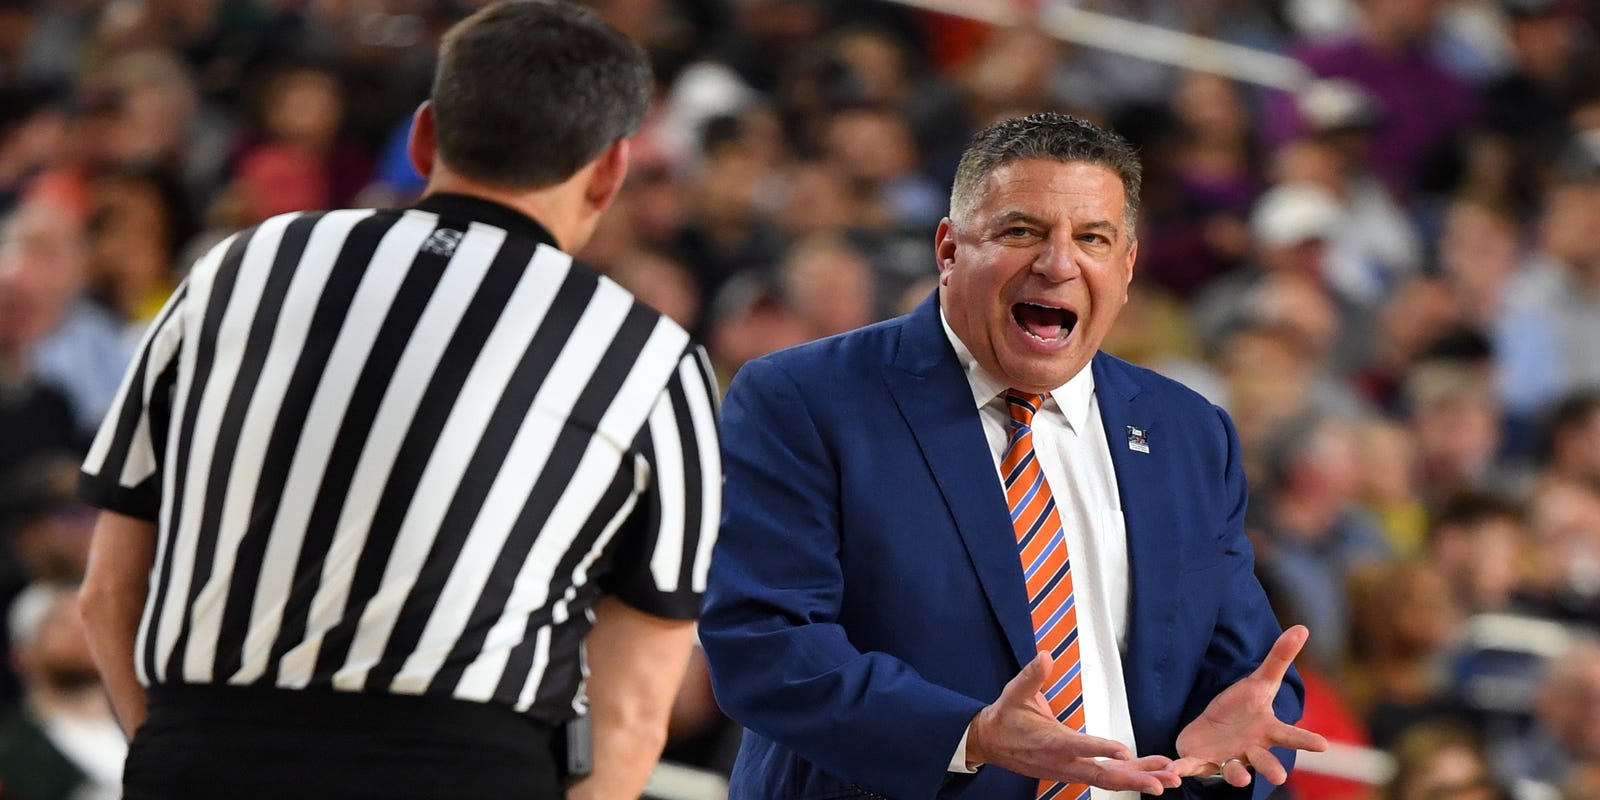 Final Four Who are the referees for the UVA, Auburn basketball game?